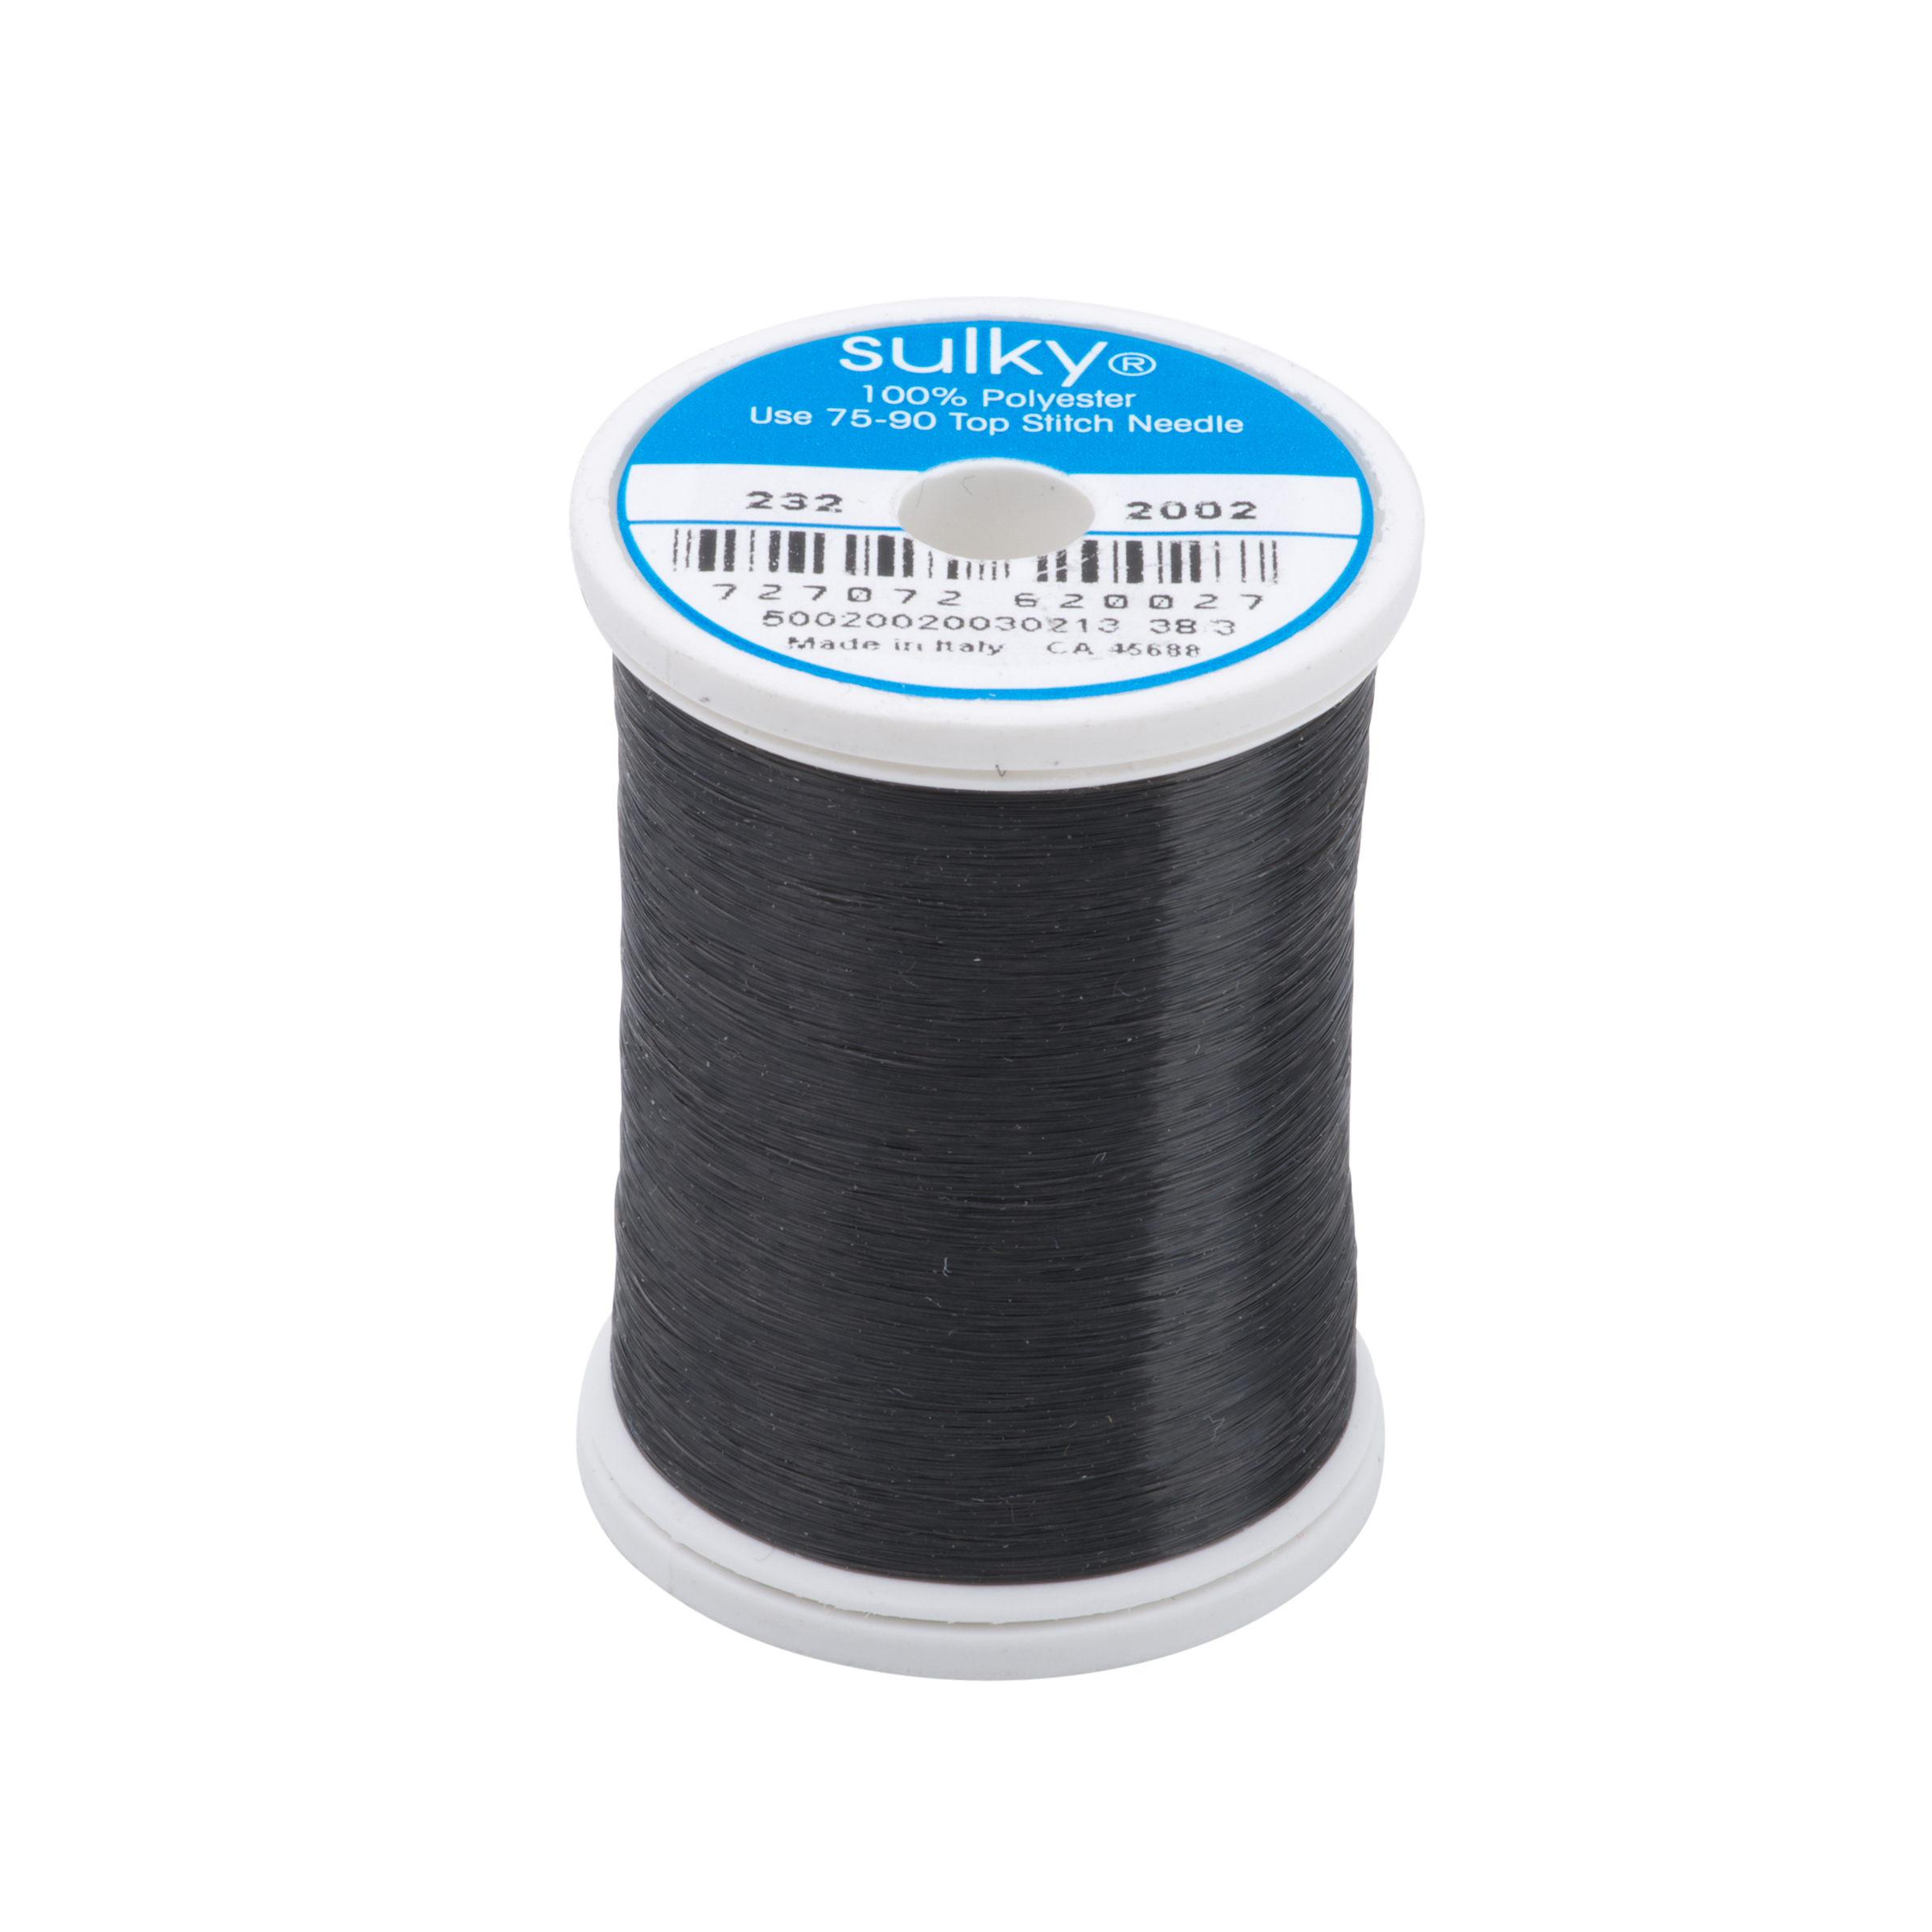 Sulky Invisible Polyester Thread - Smoke - 2,200 yd. Spool Questions & Answers